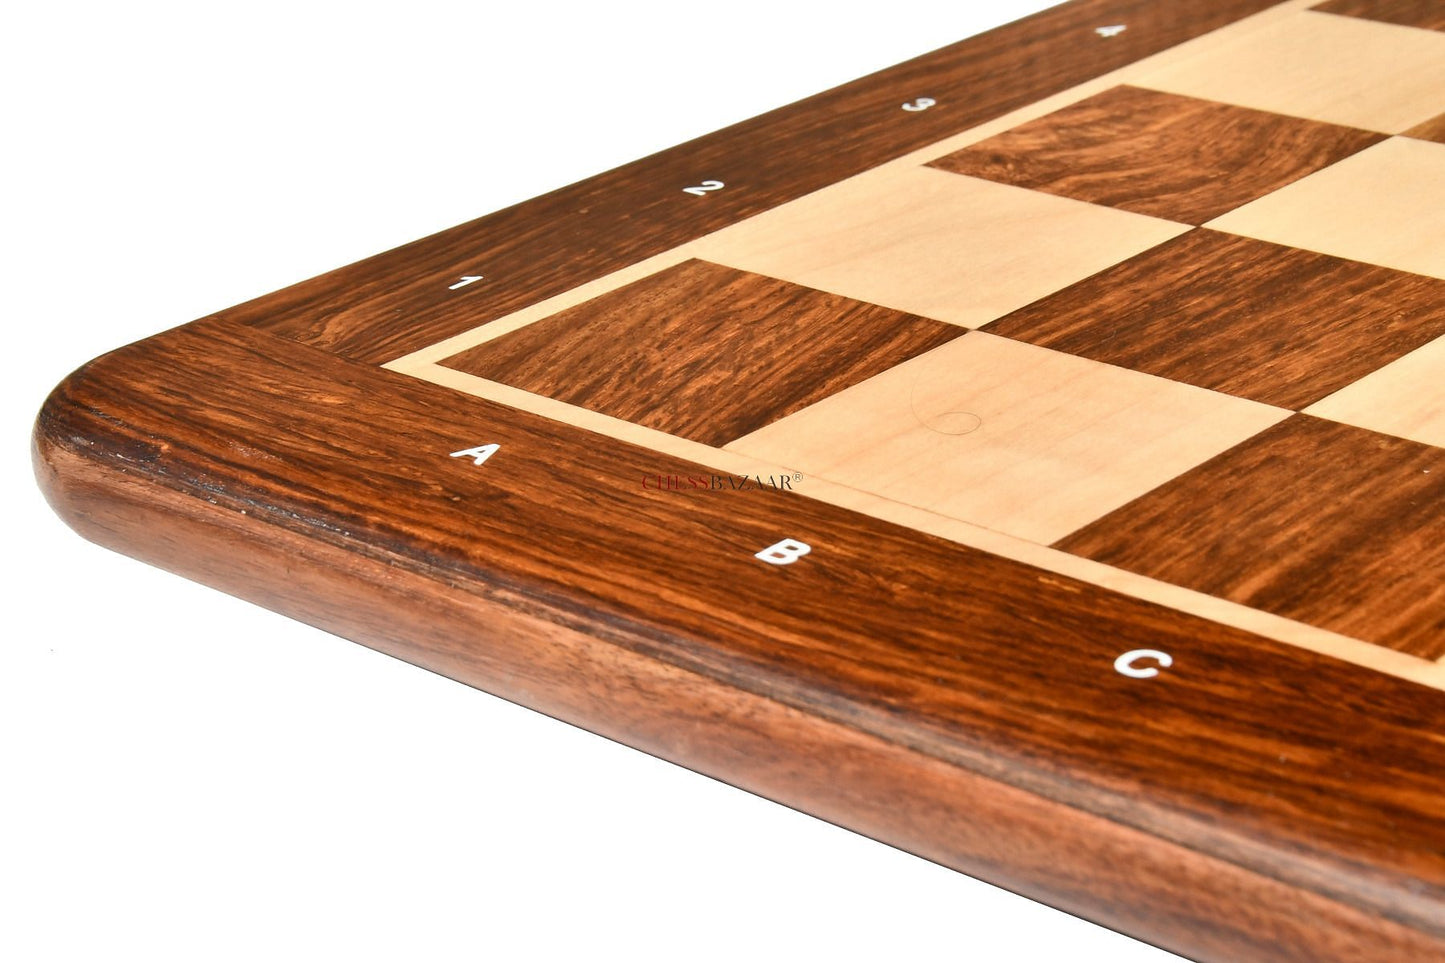 Wooden Chess Board in Sheesham Wood with Notation 21" - 55 mm